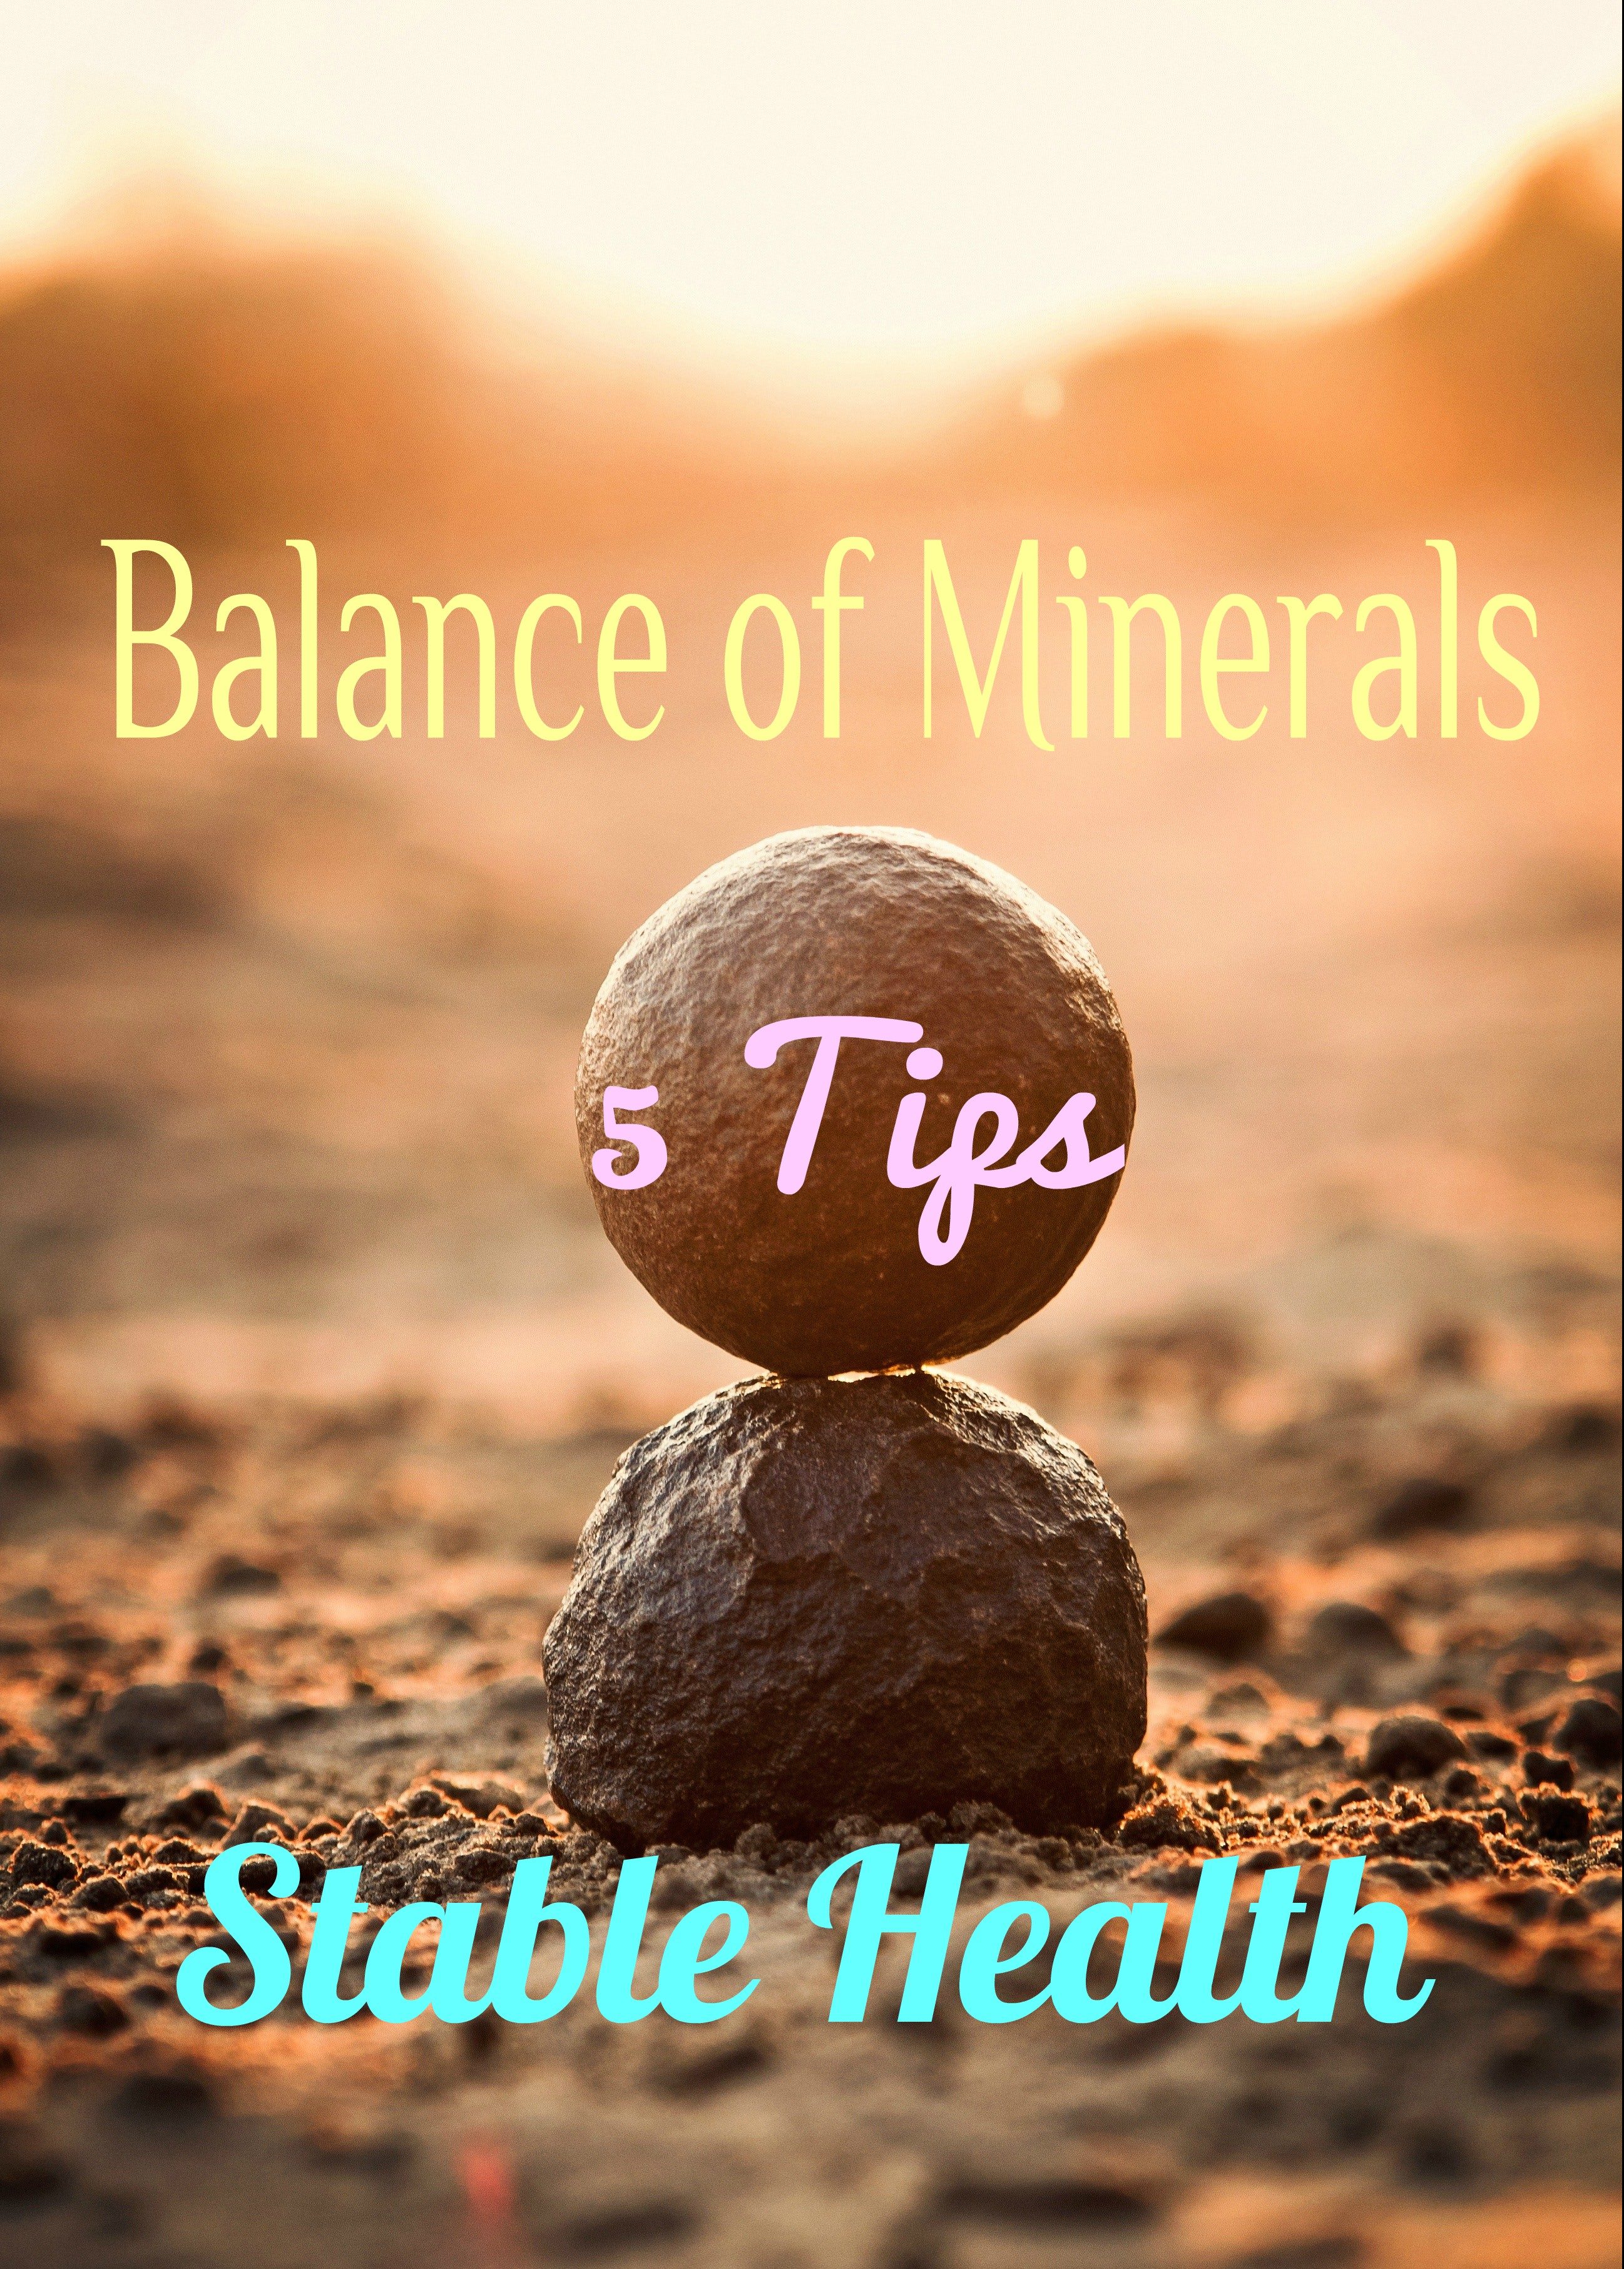 Balance of Minerals for stable health